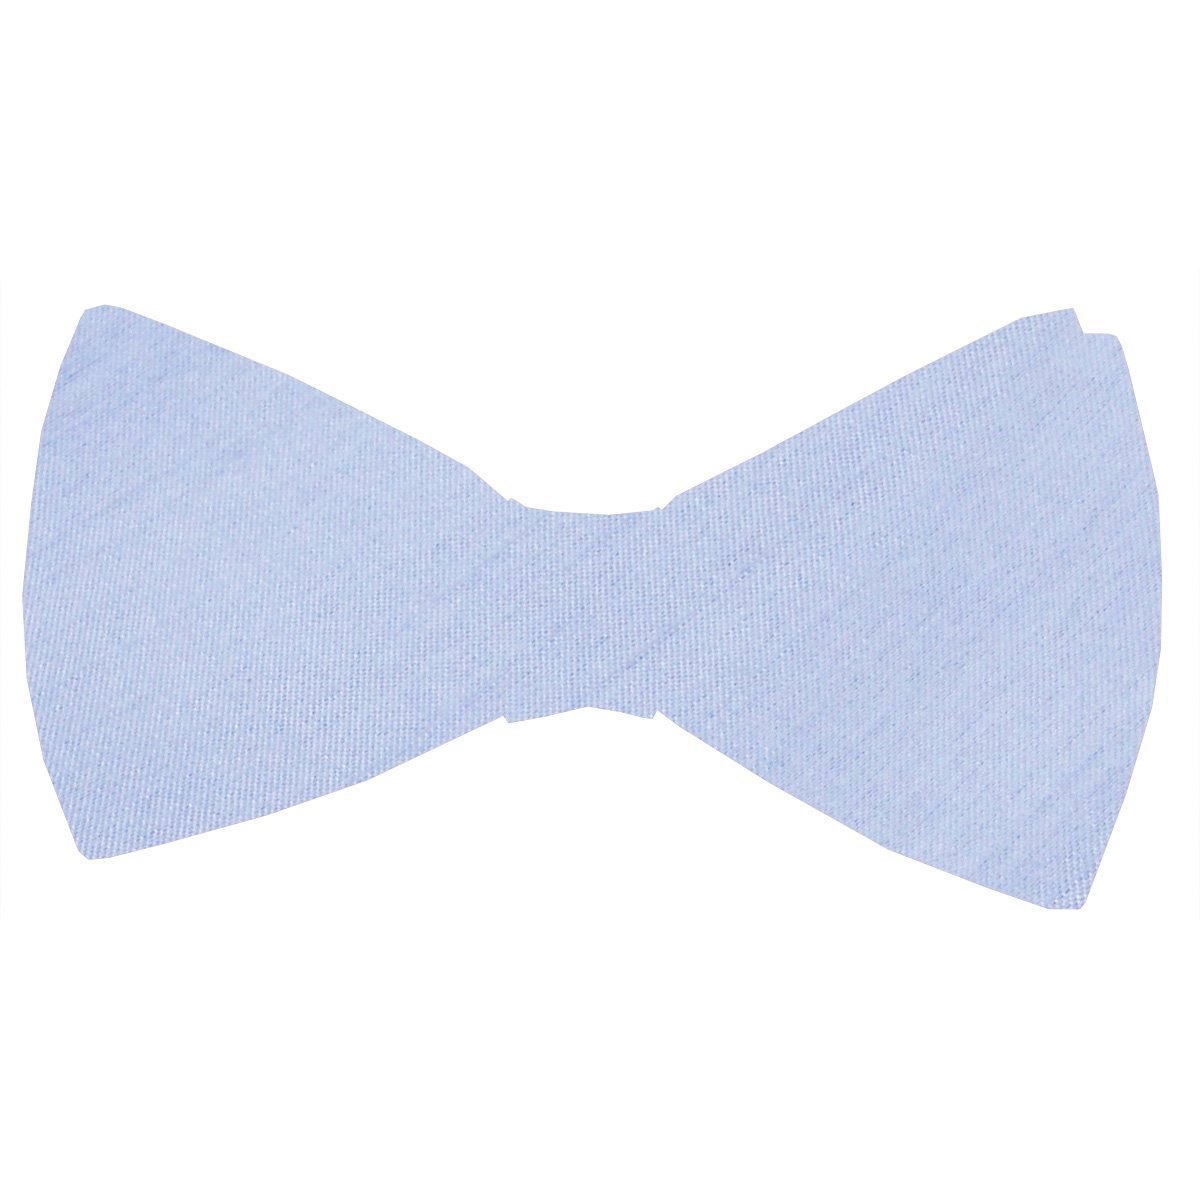 Ice Blue Shantung Bow Ties - Wedding Bow Tie - Pre-Tied - Swagger & Swoon